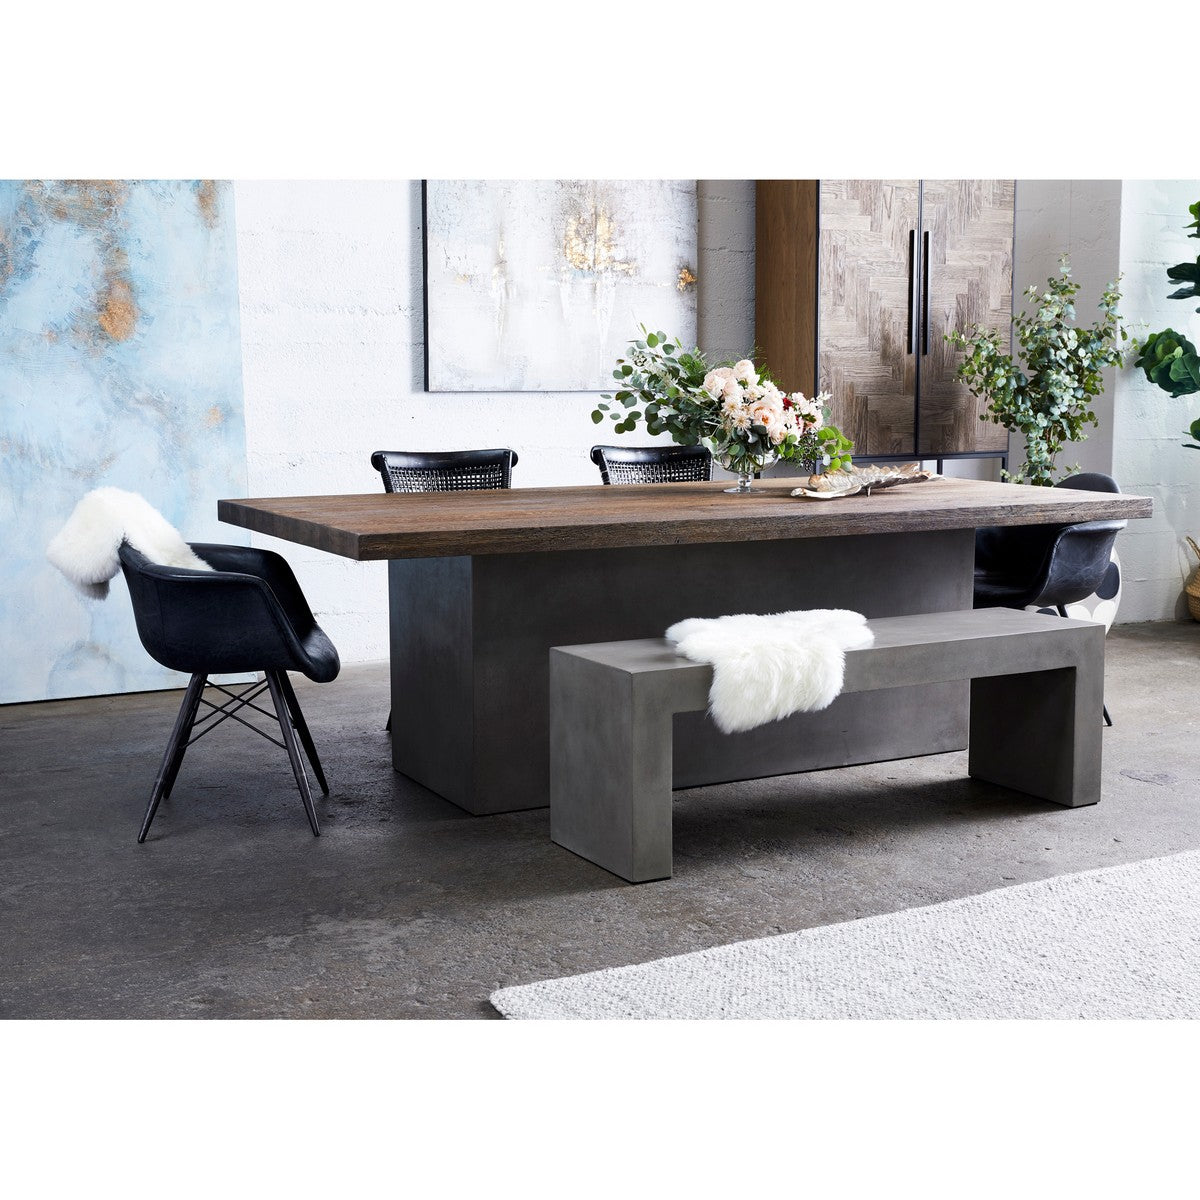 Moe's Home Collection Kaia Oak Dining Table - BQ-1030-25 - Moe's Home Collection - Dining Tables - Minimal And Modern - 1